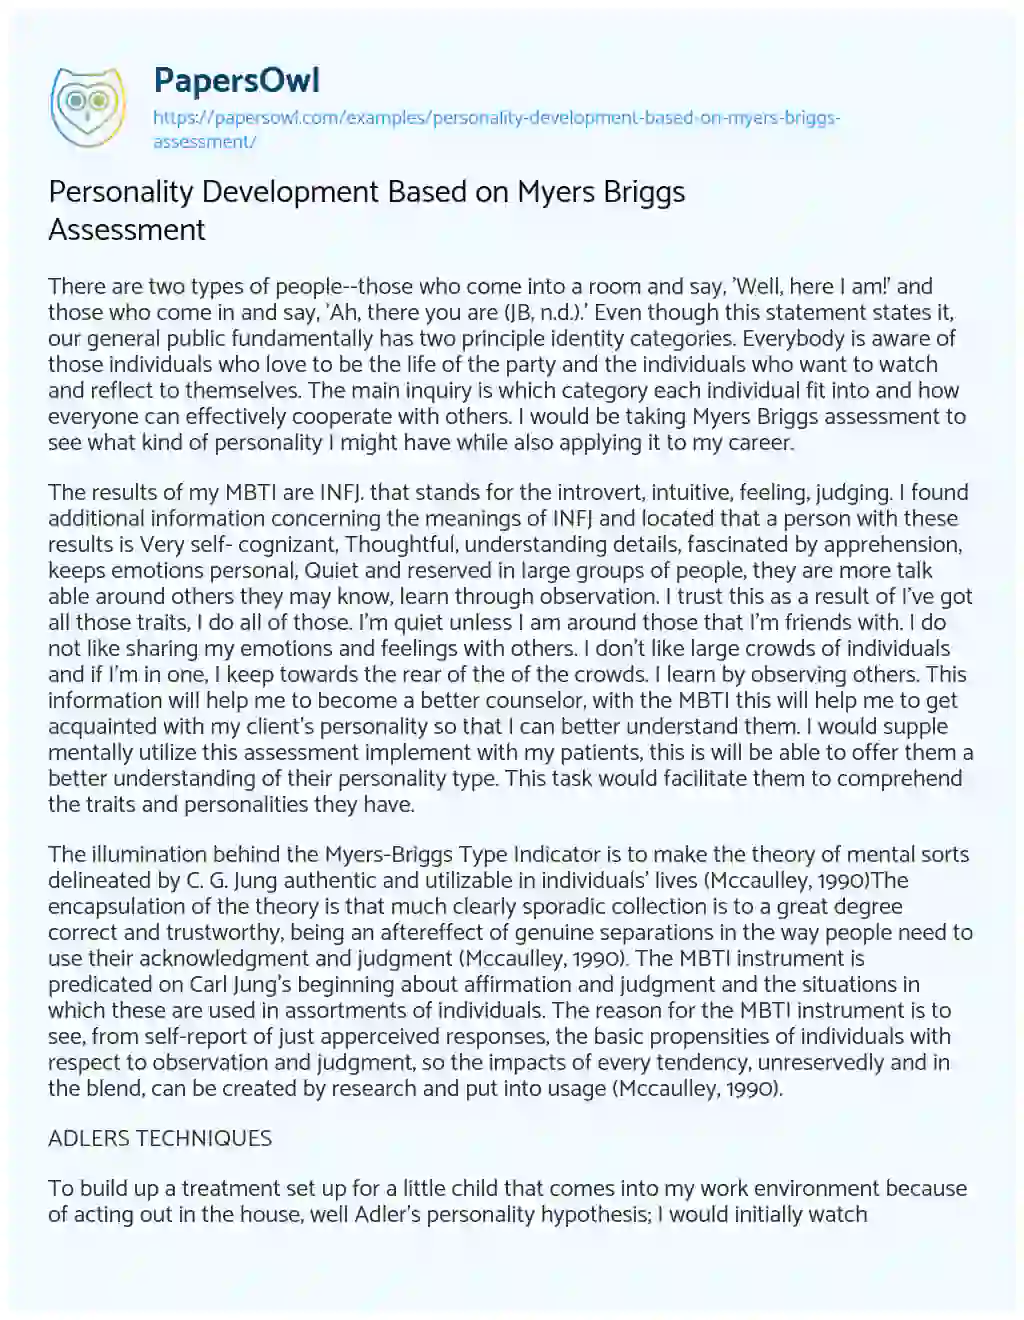 Essay on Personality Development Based on Myers Briggs Assessment